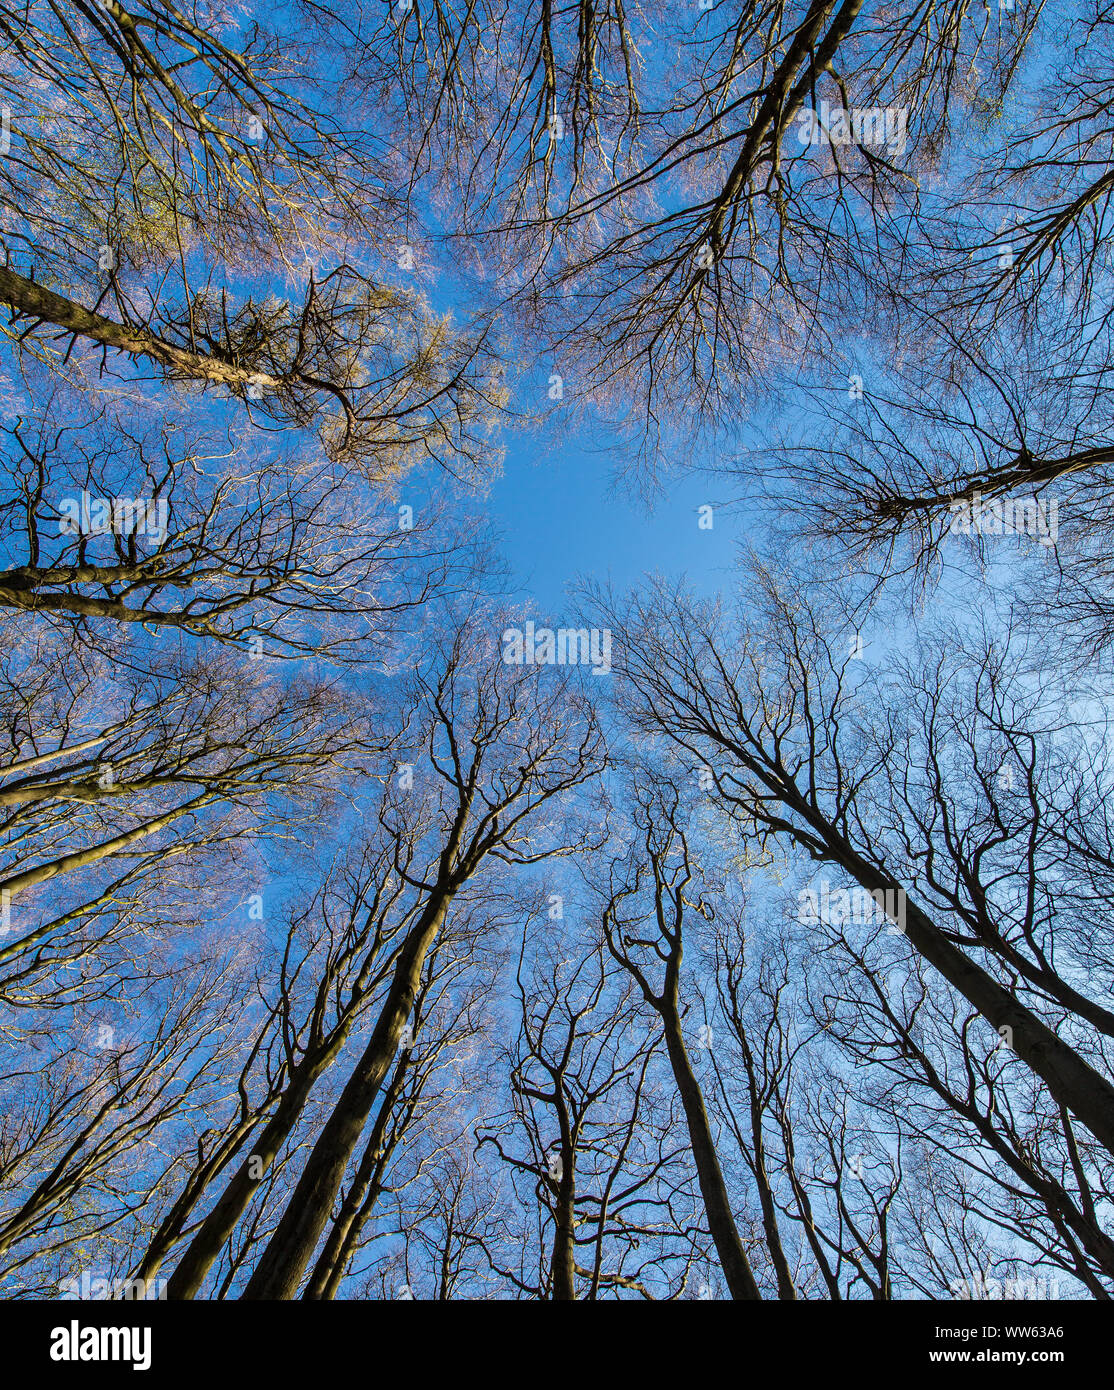 Bald tree tops in beech forest, close up Stock Photo